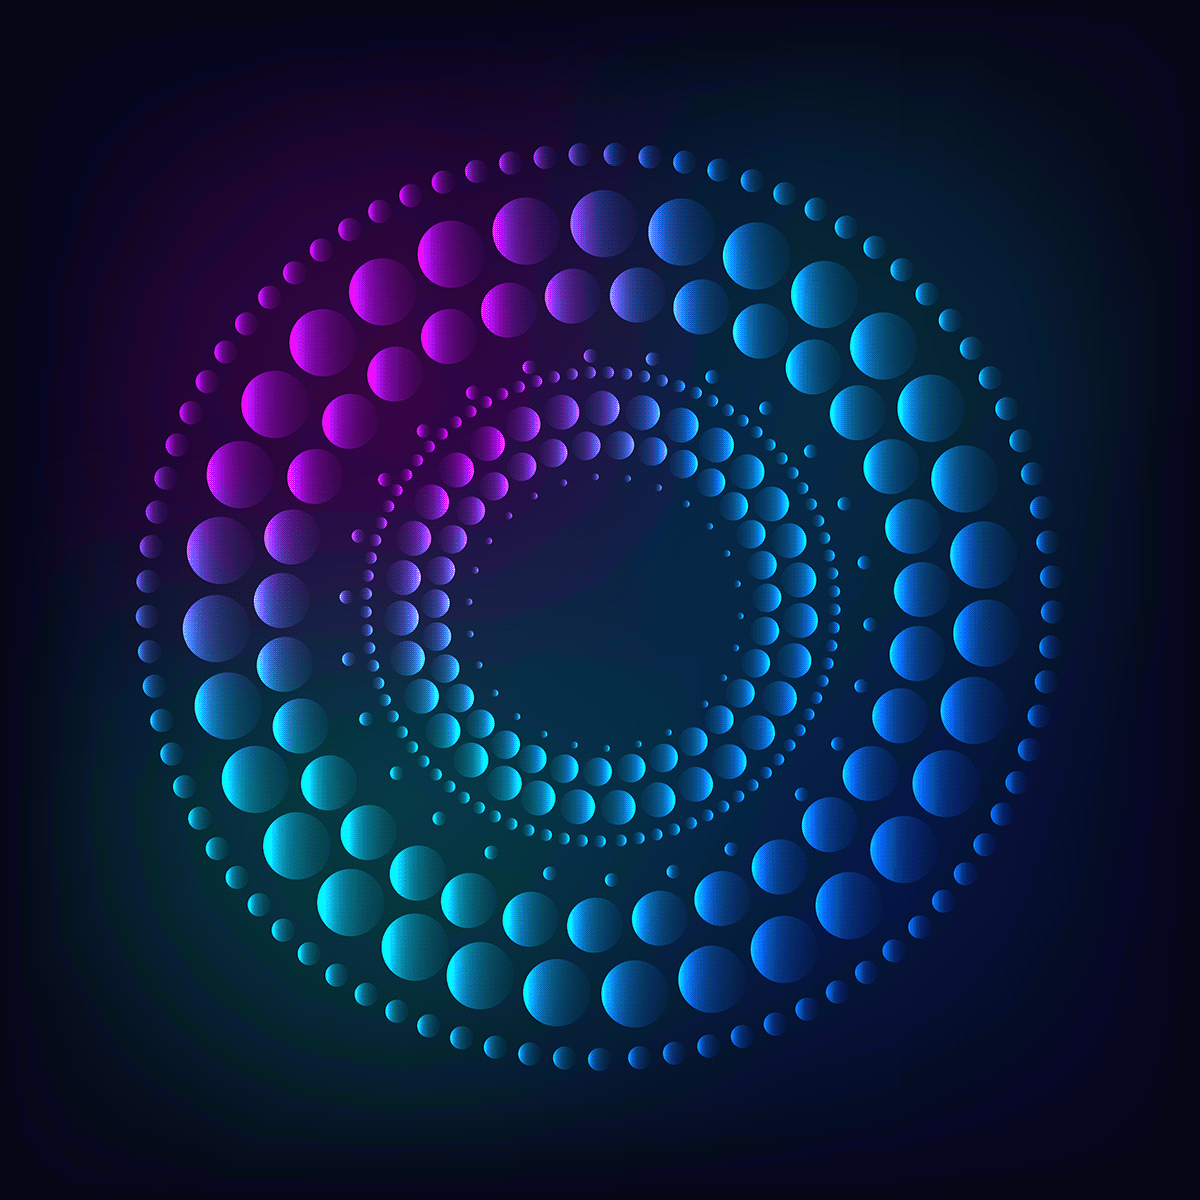 Abstract Circle Set - Download Free Vector Art, Stock Graphics & Images